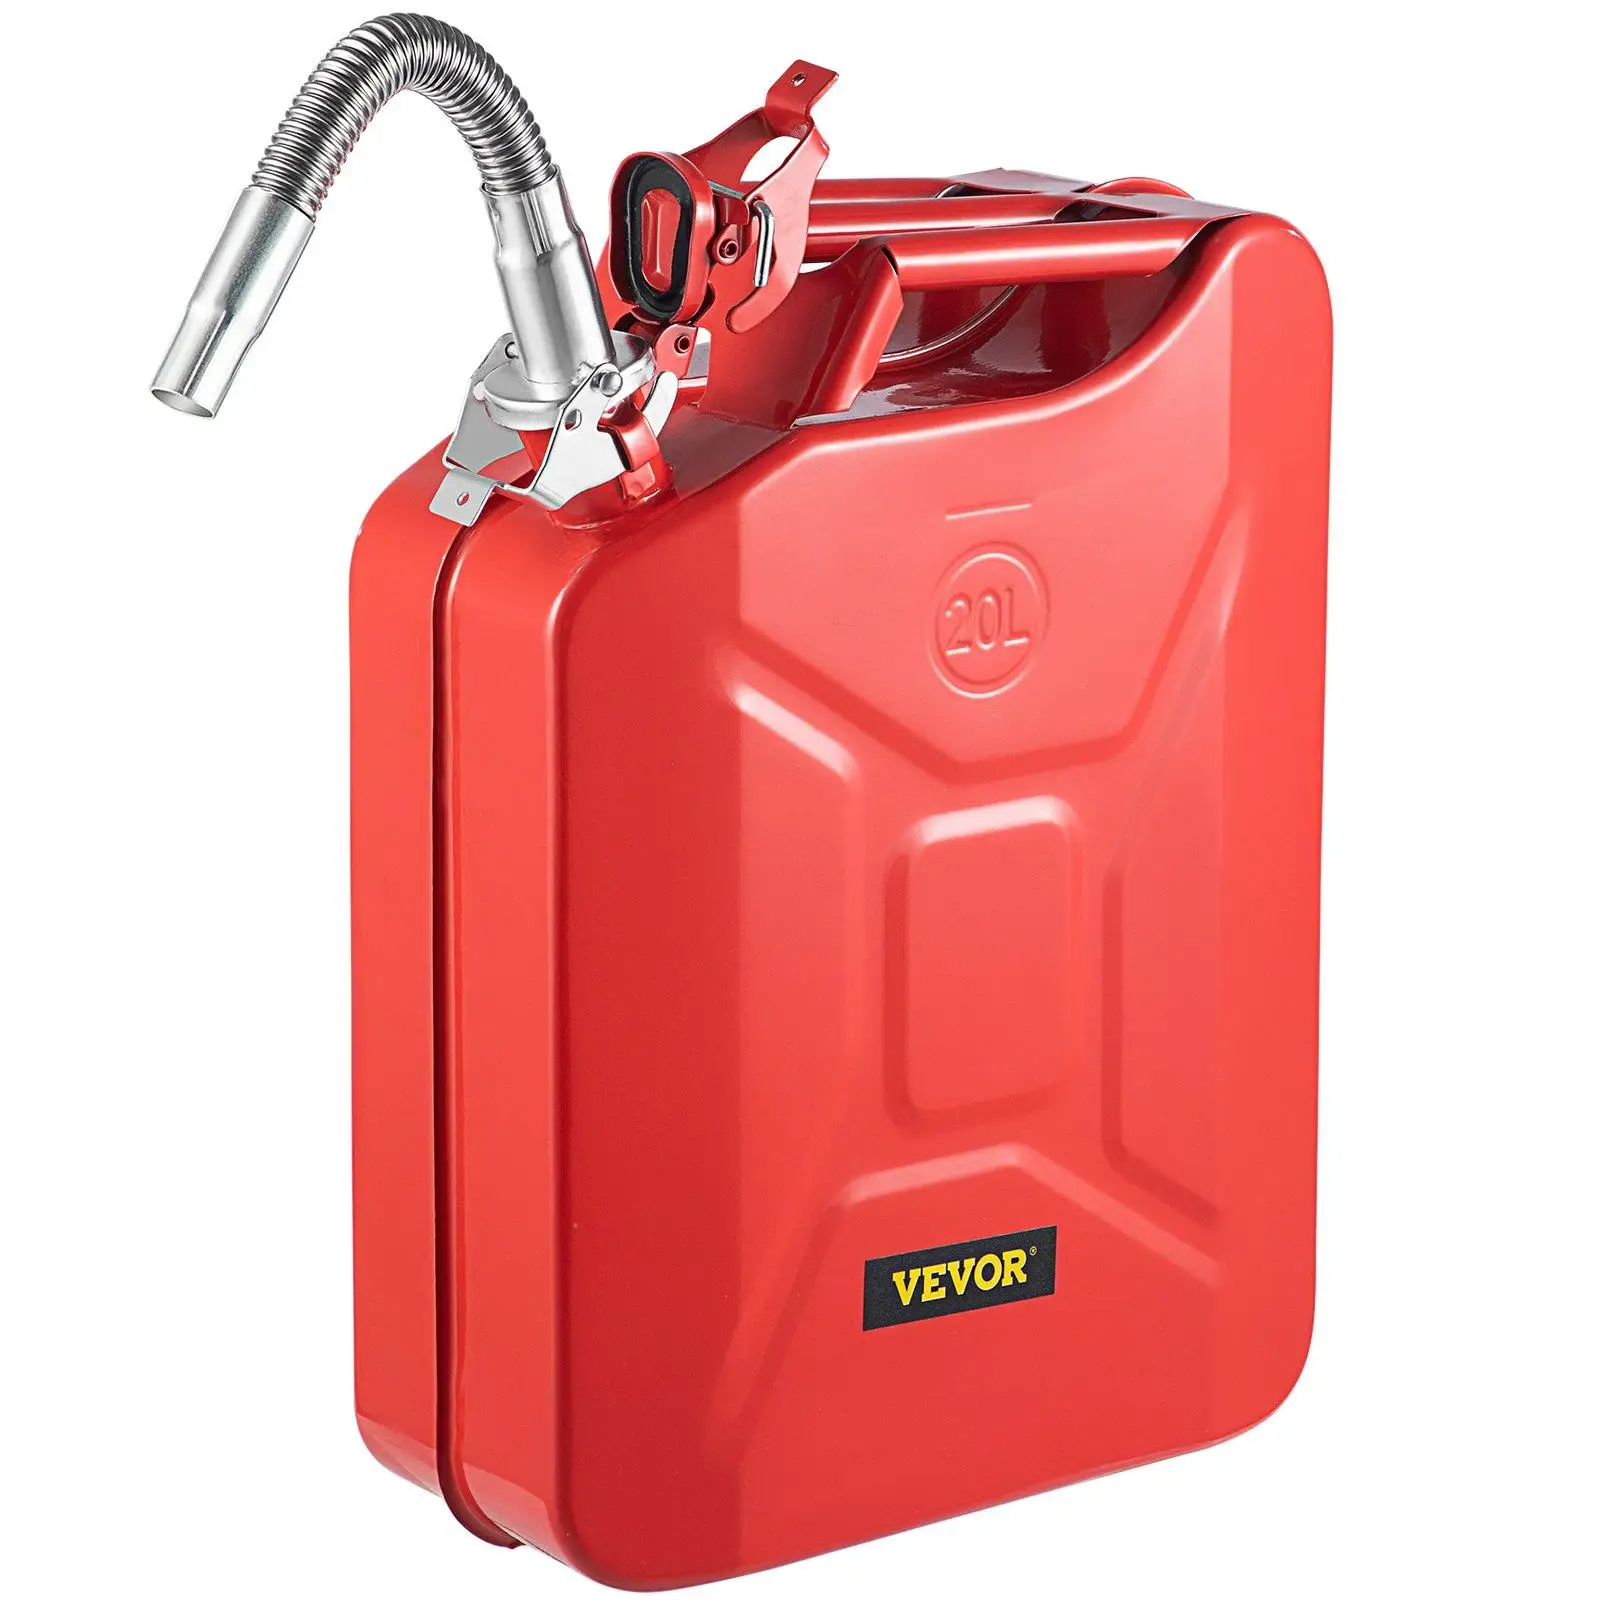 VEVOR jerry fuel can